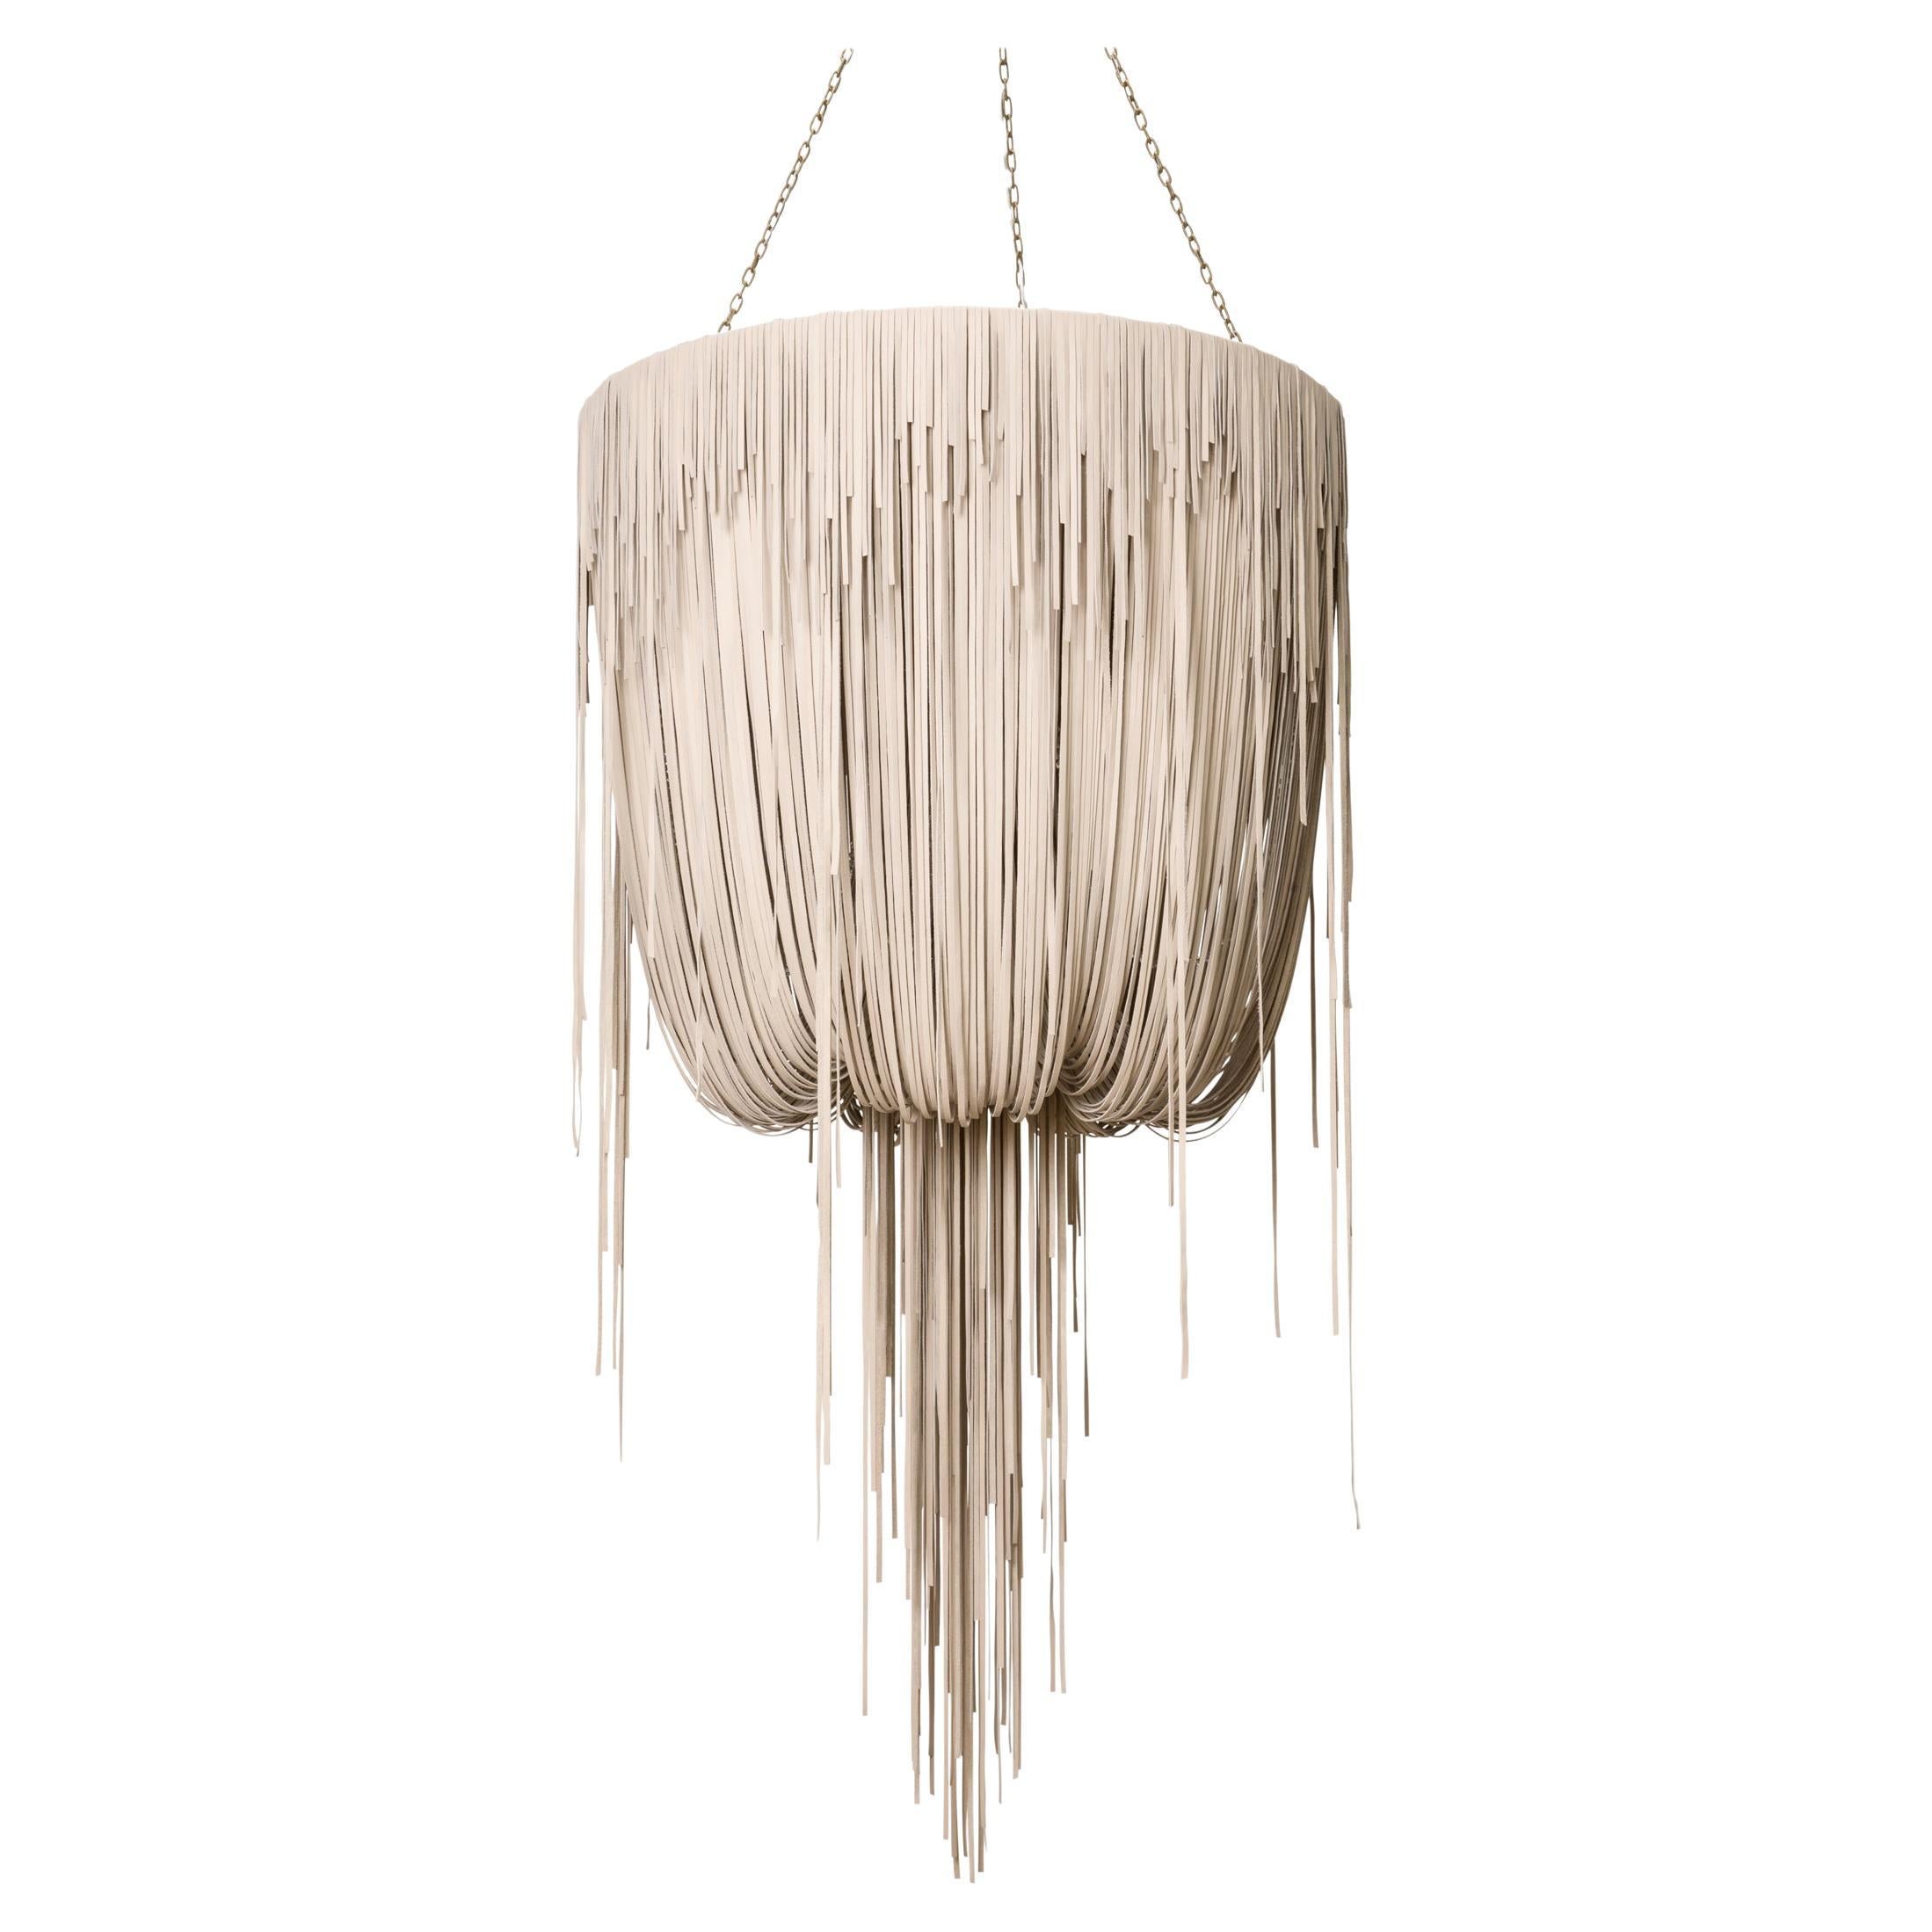 Urchin Leather Chandelier, Medium in Cream-Stone Leather For Sale